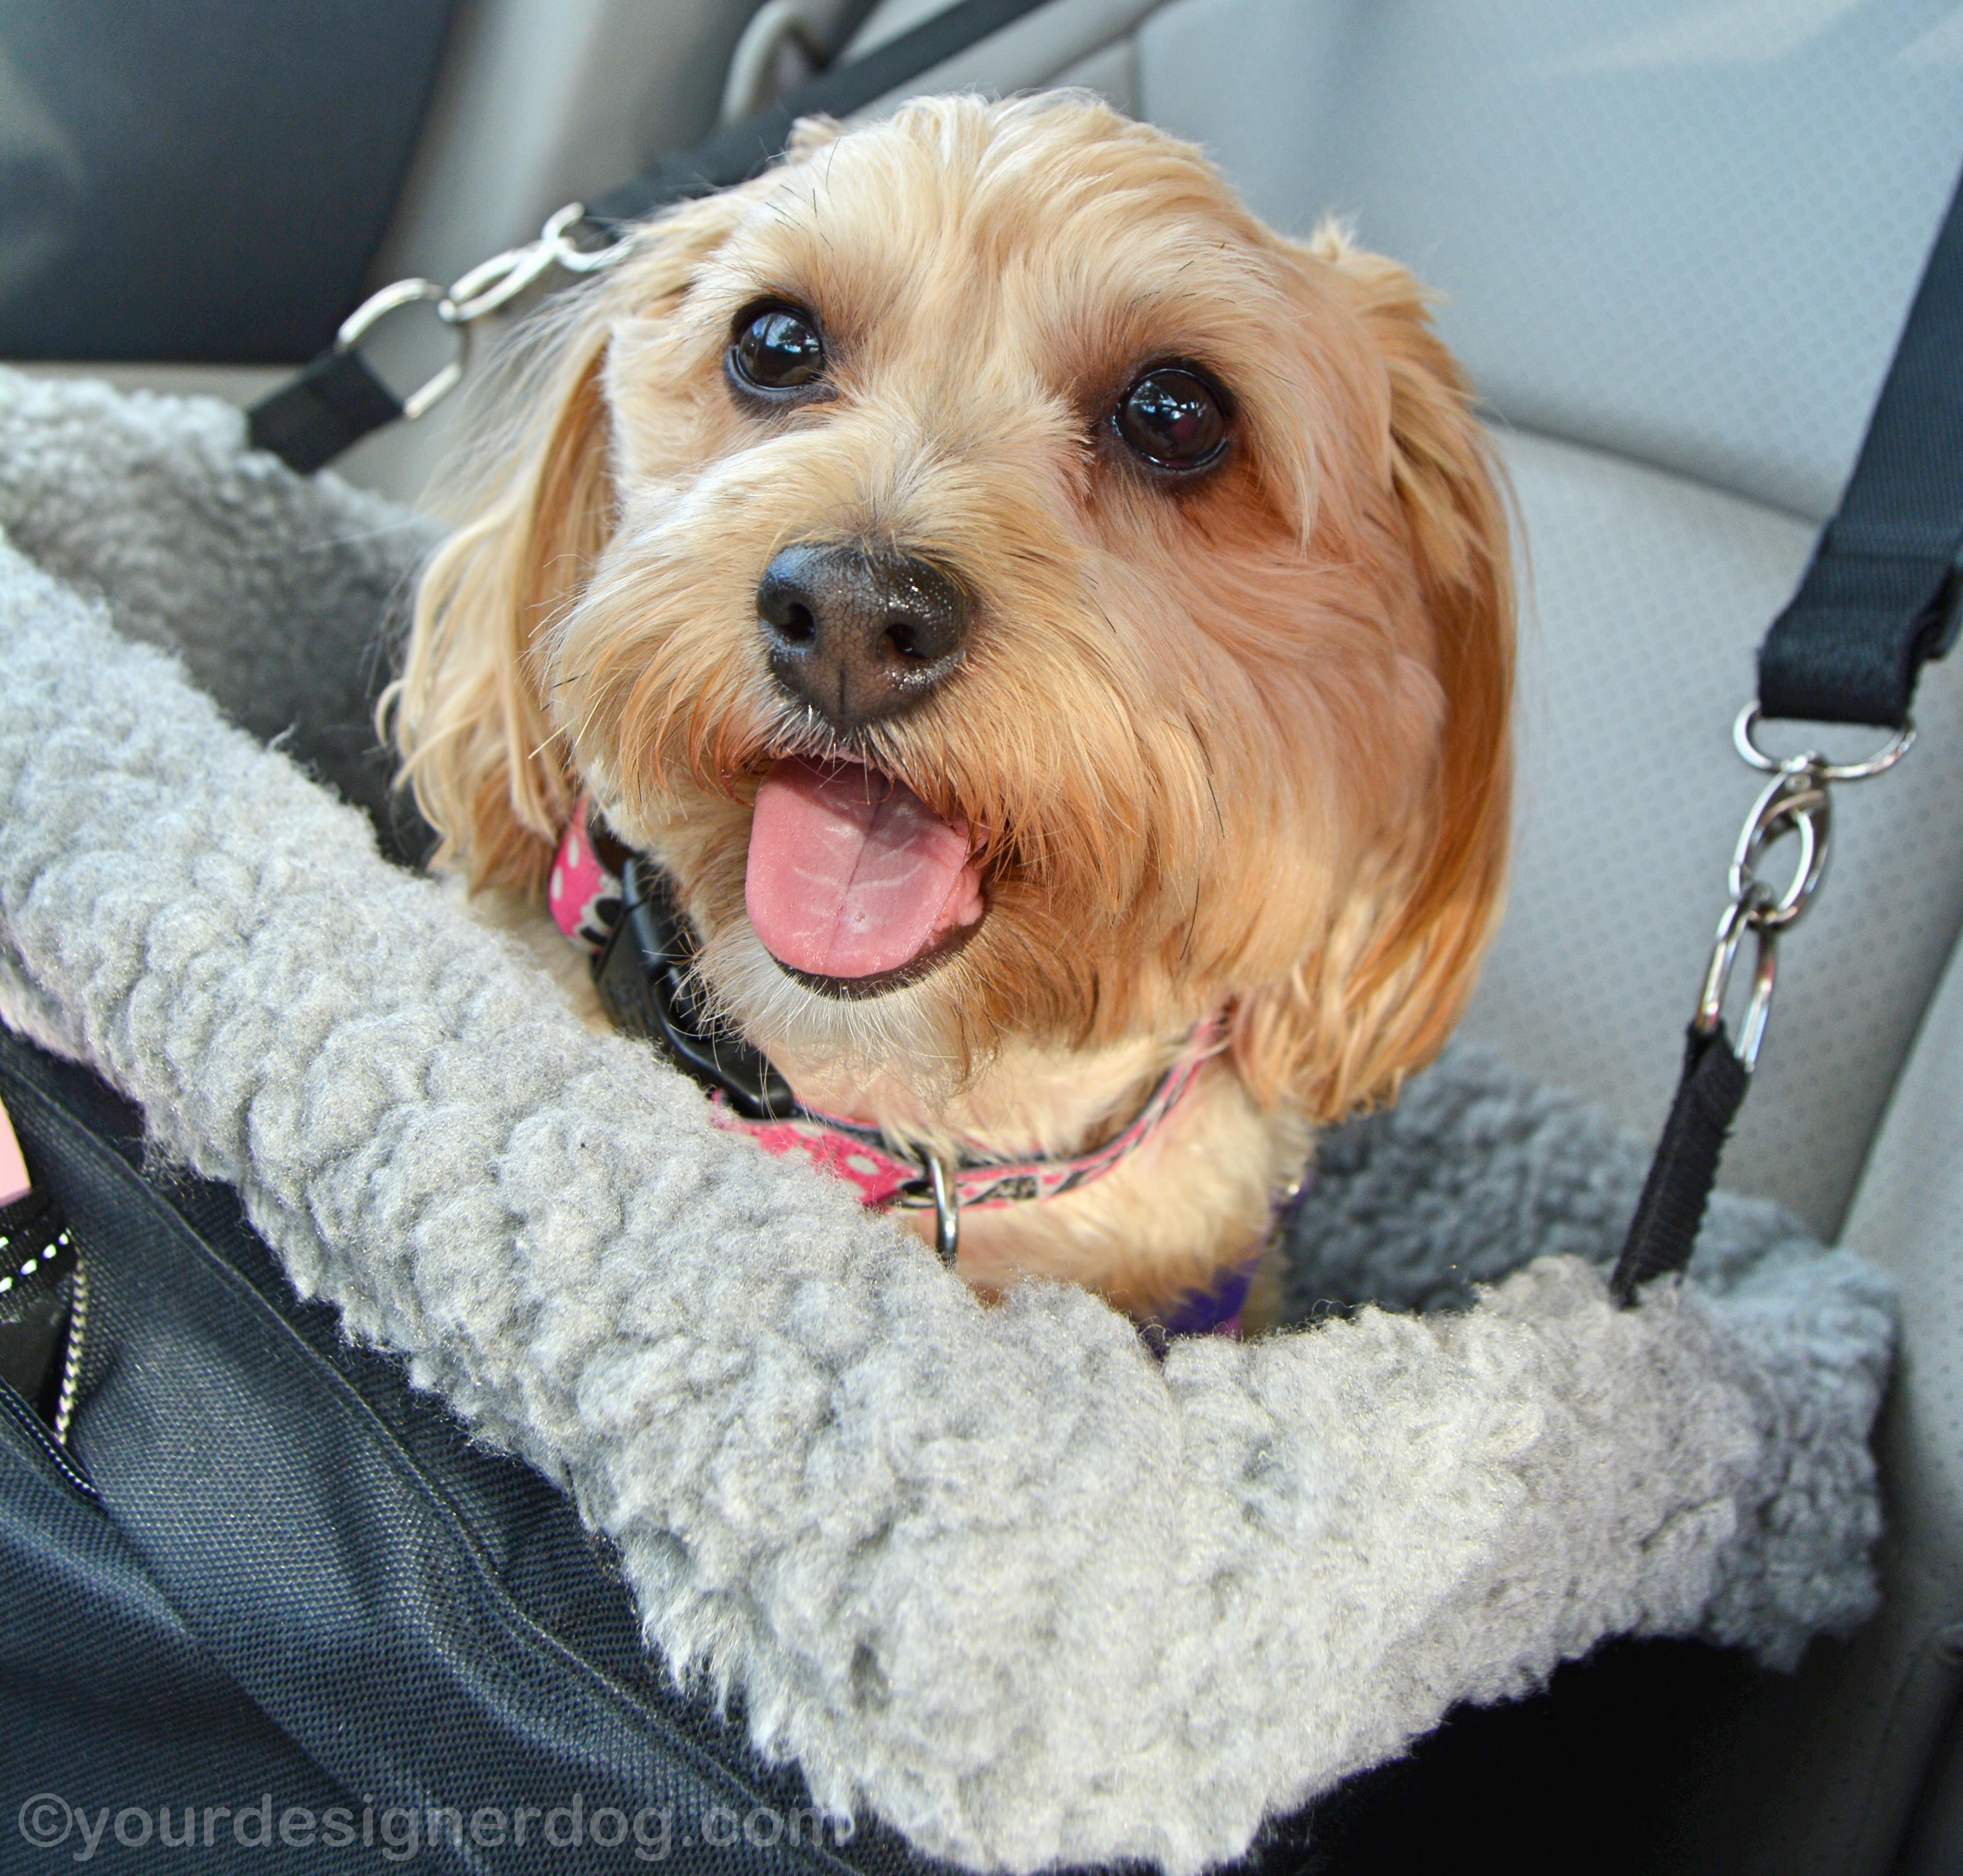 dogs, designer dogs, yorkipoo, yorkie poo, tongue out, car seat